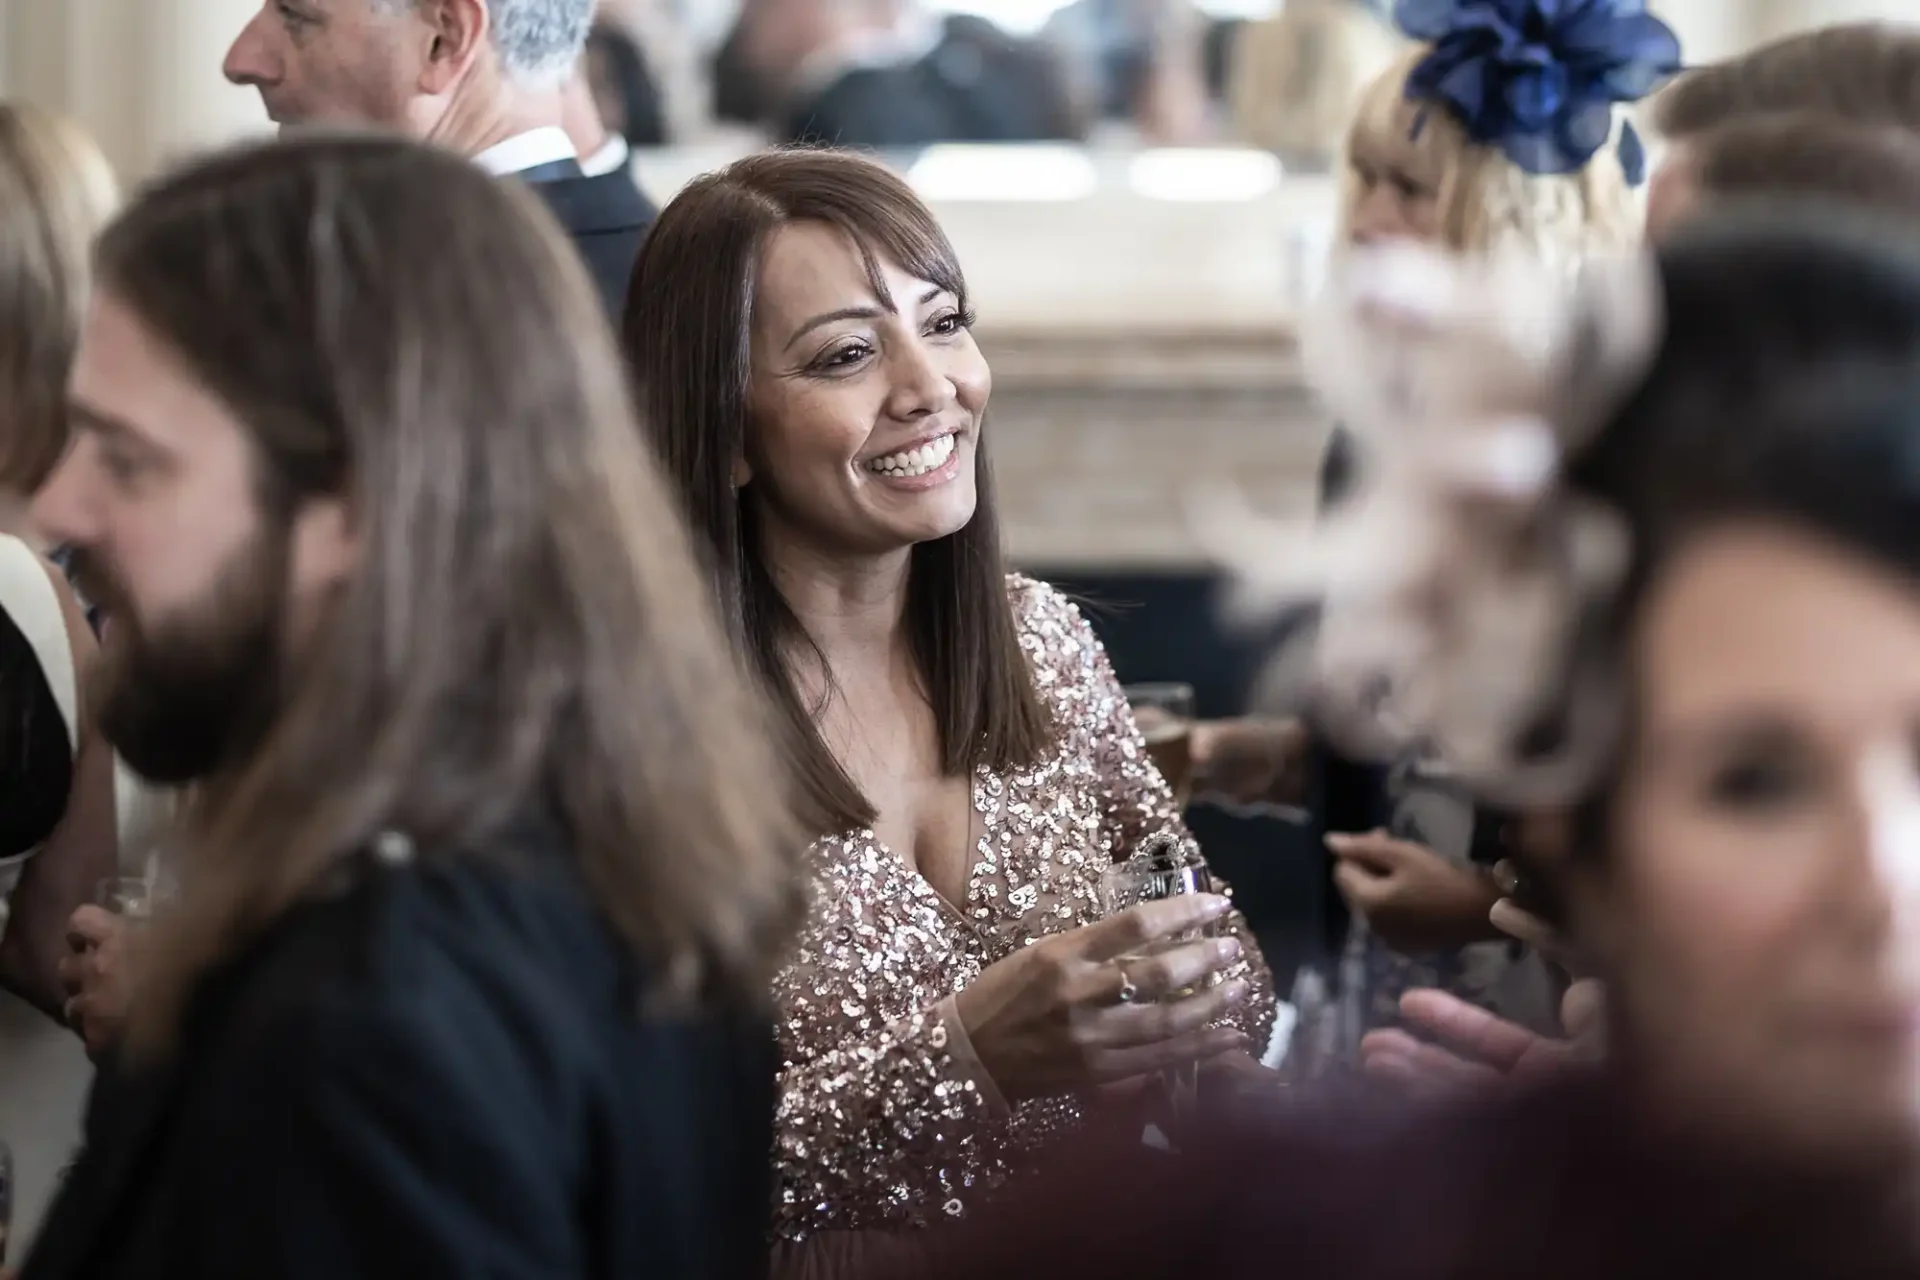 A woman in a sparkly dress smiling and conversing at a social gathering, surrounded by other guests in a softly blurred background.